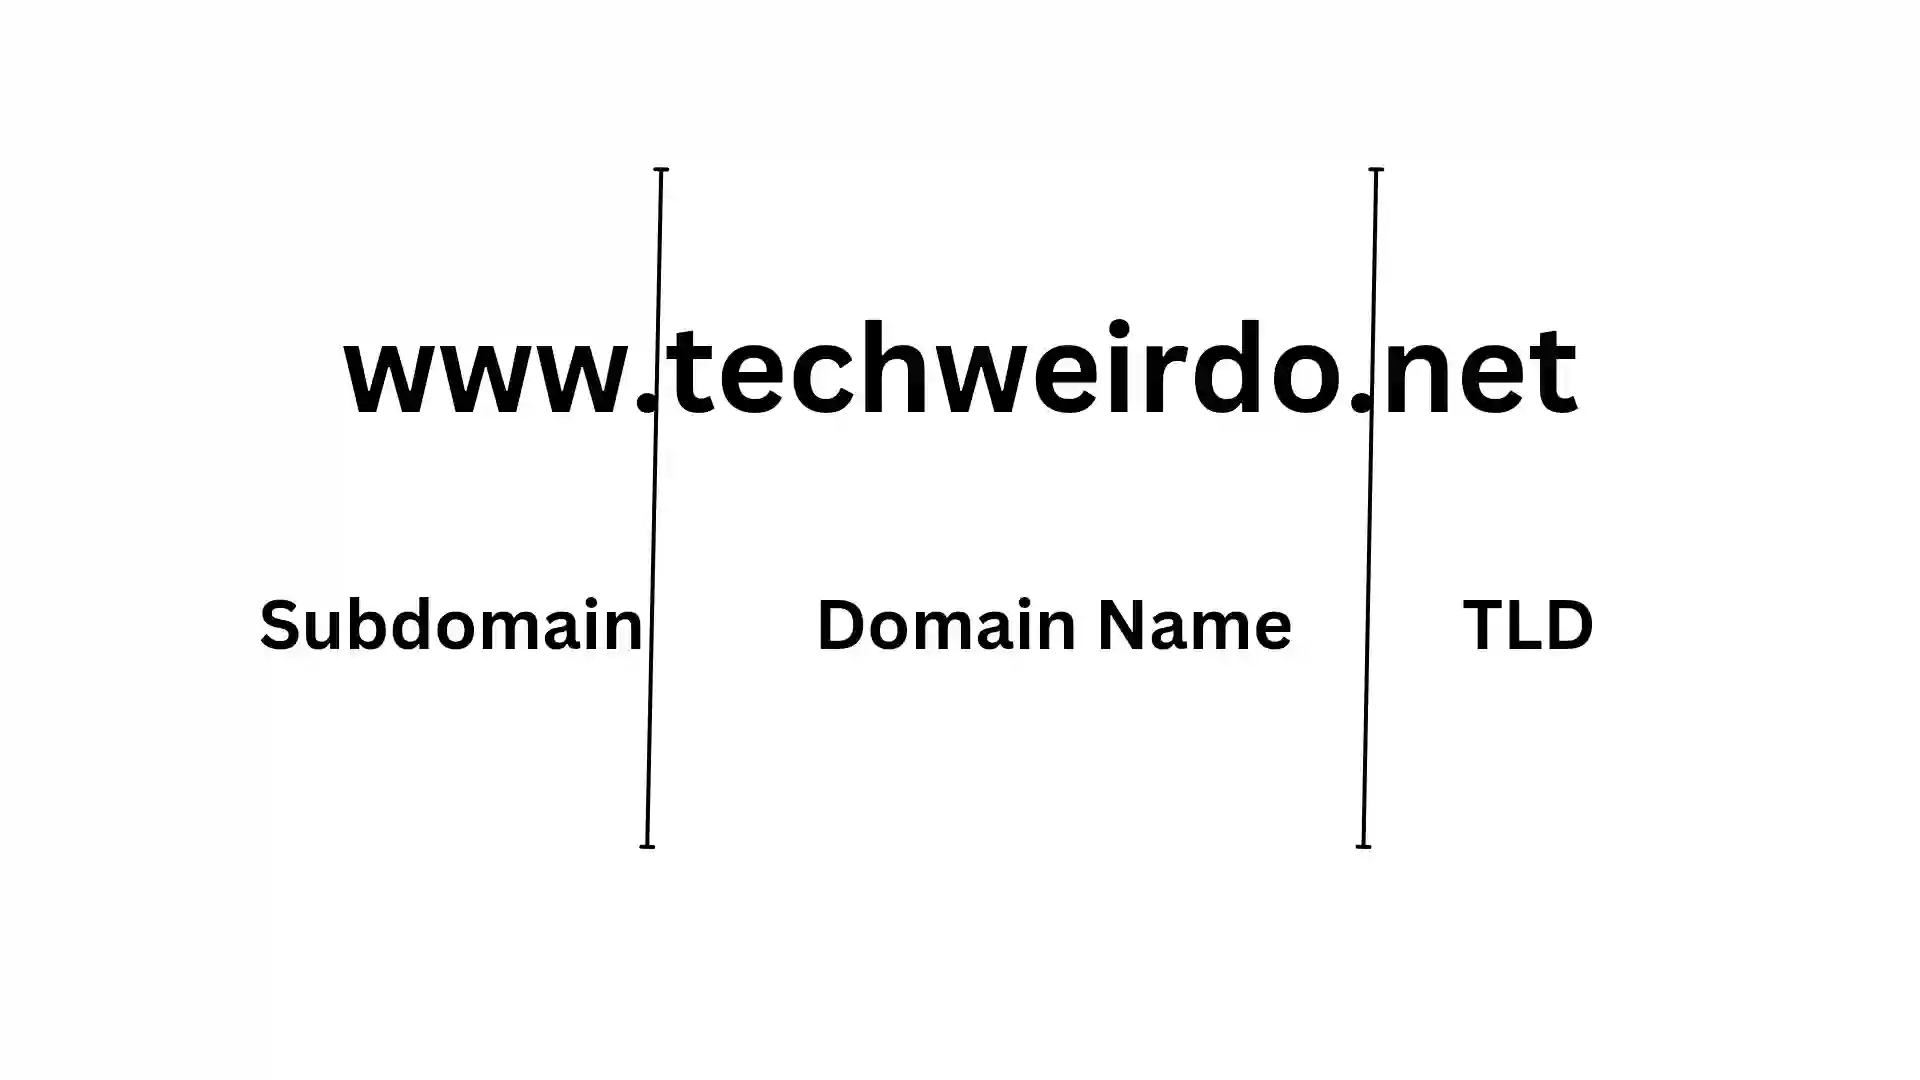 Terms and Concepts of Webhosting You need to Know: Part 2 (IP address Domain Name and DNS)